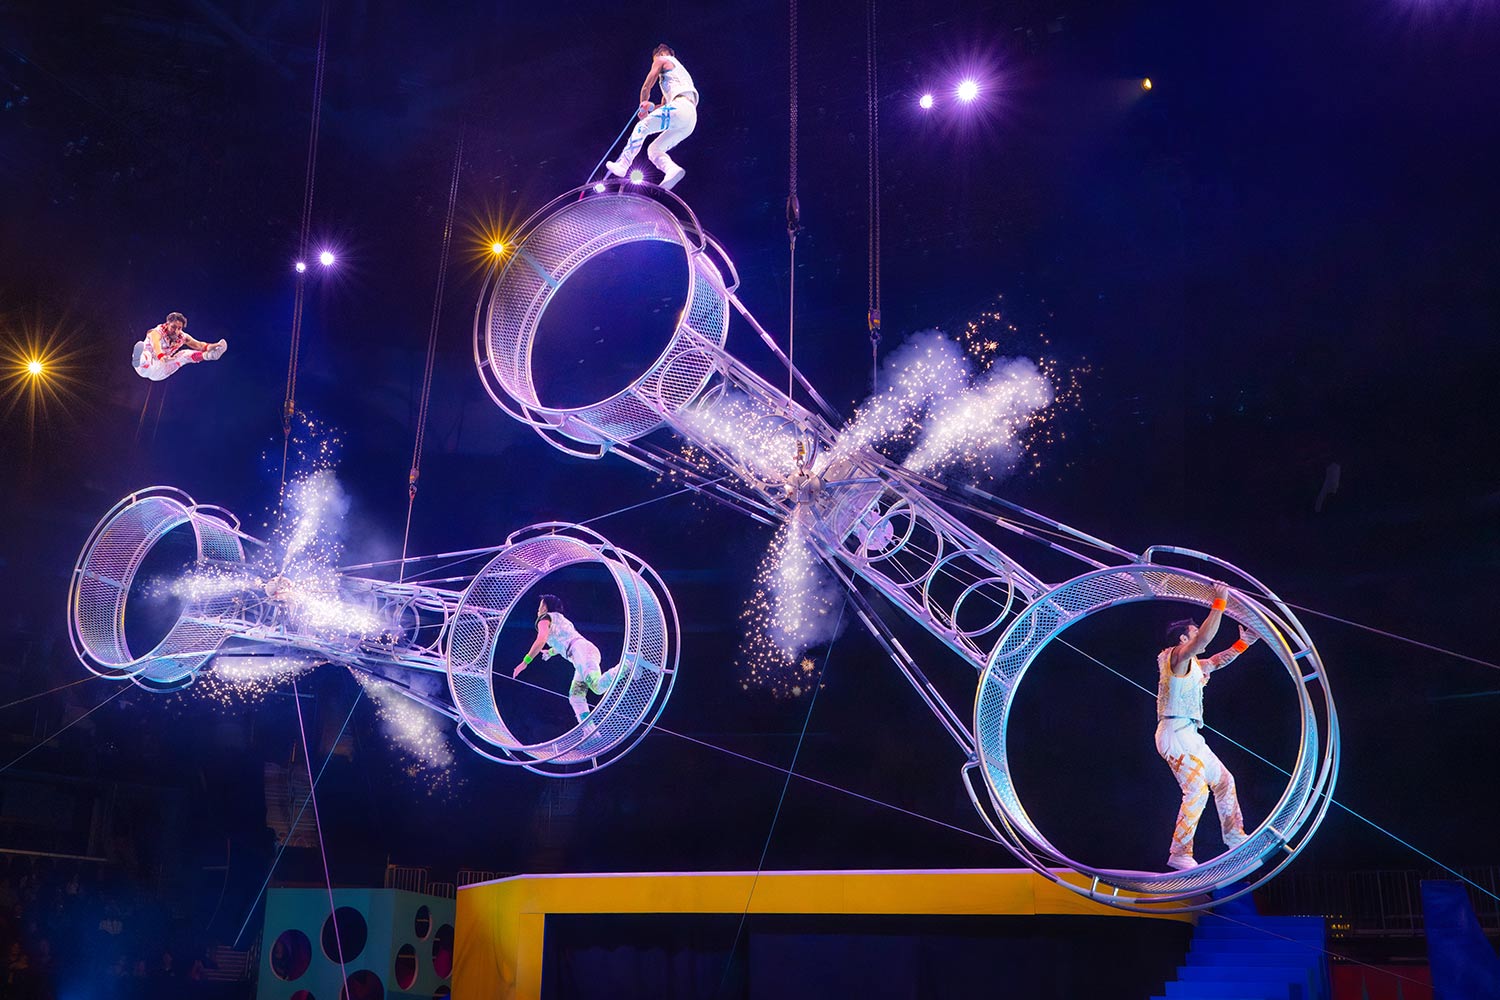 Acrobats riding a giant spinning wheel and flipping